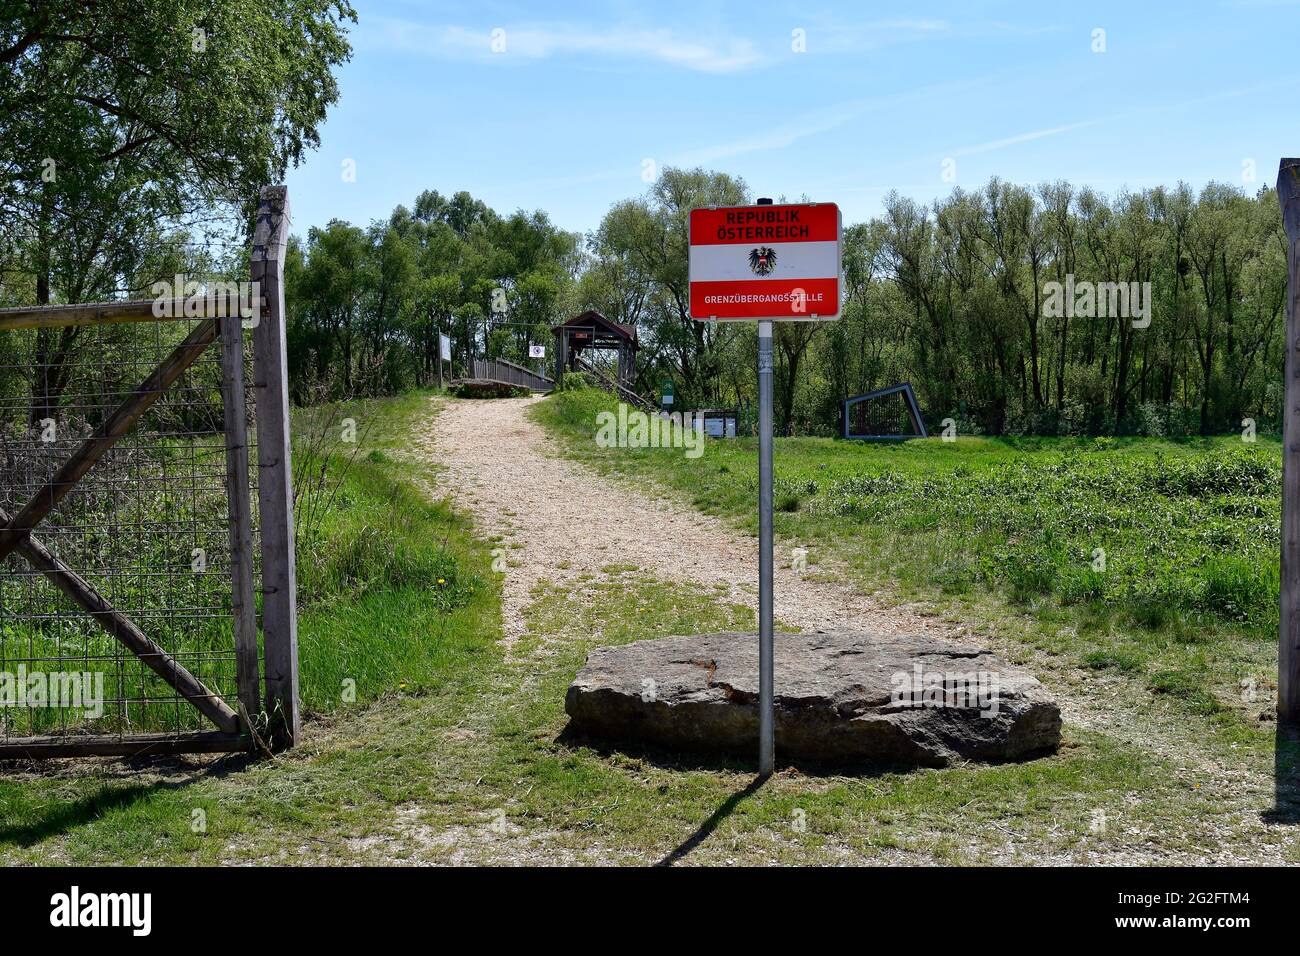 Andau, Austria - May 04, 2021: Border crossing point at the rebuilt historical bridge of Andau crossing Einserkanal river- destroyed by Soviets - wher Stock Photo